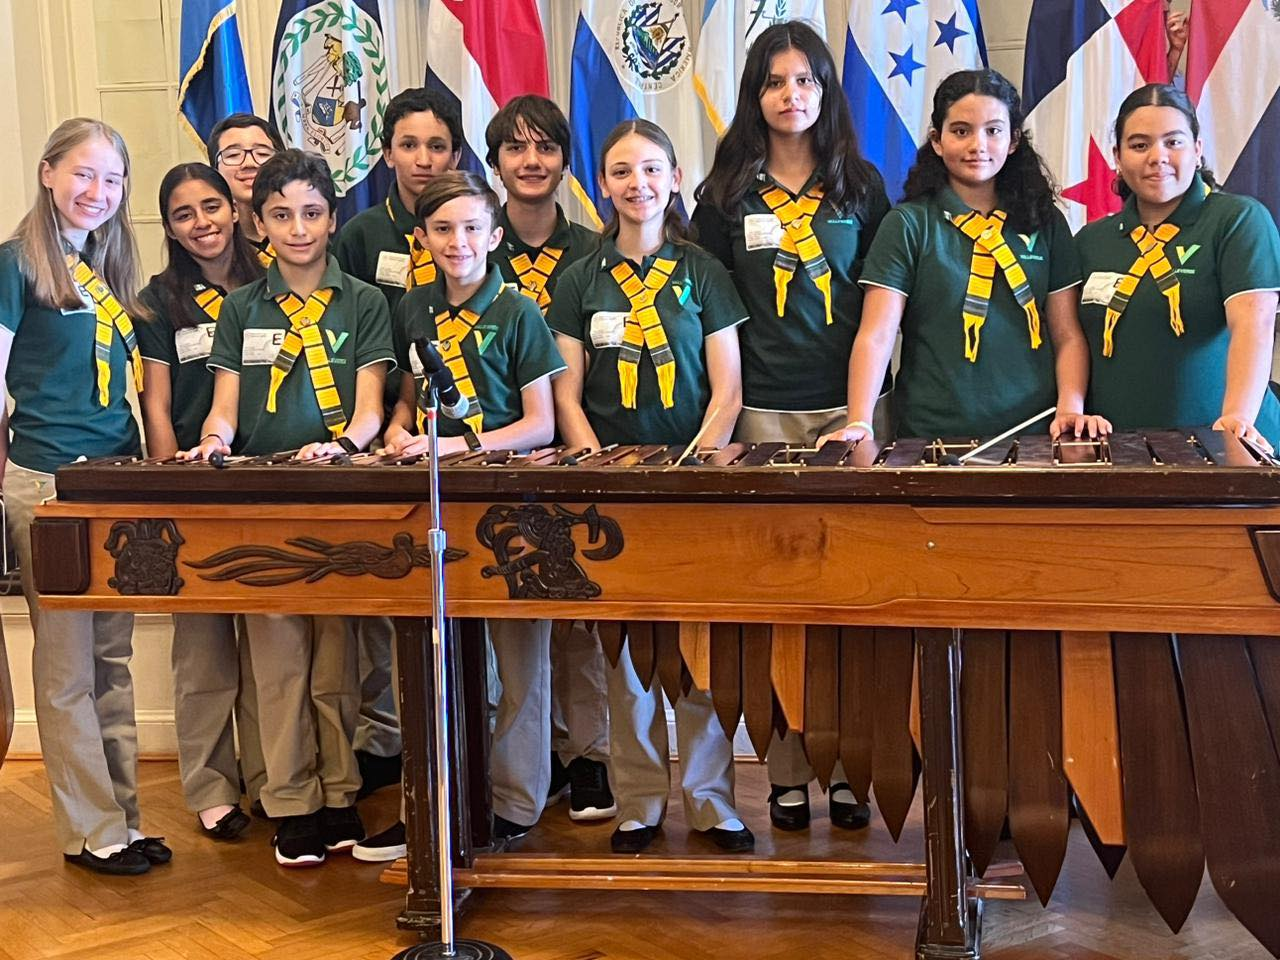 Students from the Children’s Marimba Valle Verde School with a marimba, which is a national symbol of culture in Guatemala.